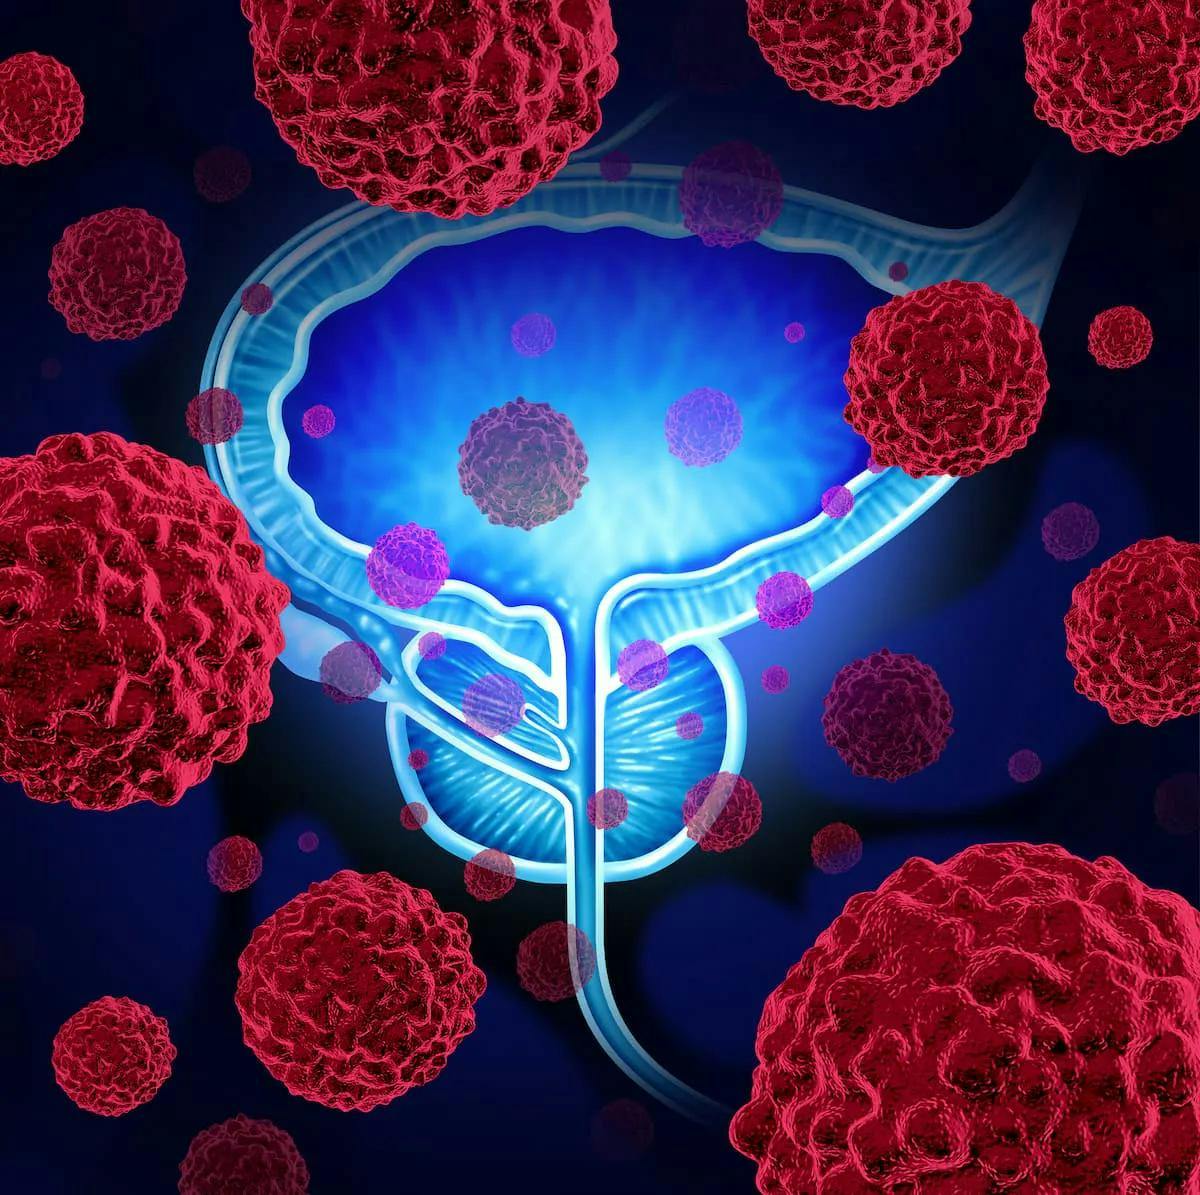 Study shows HIFU noninferior to prostatectomy for localized prostate cancer